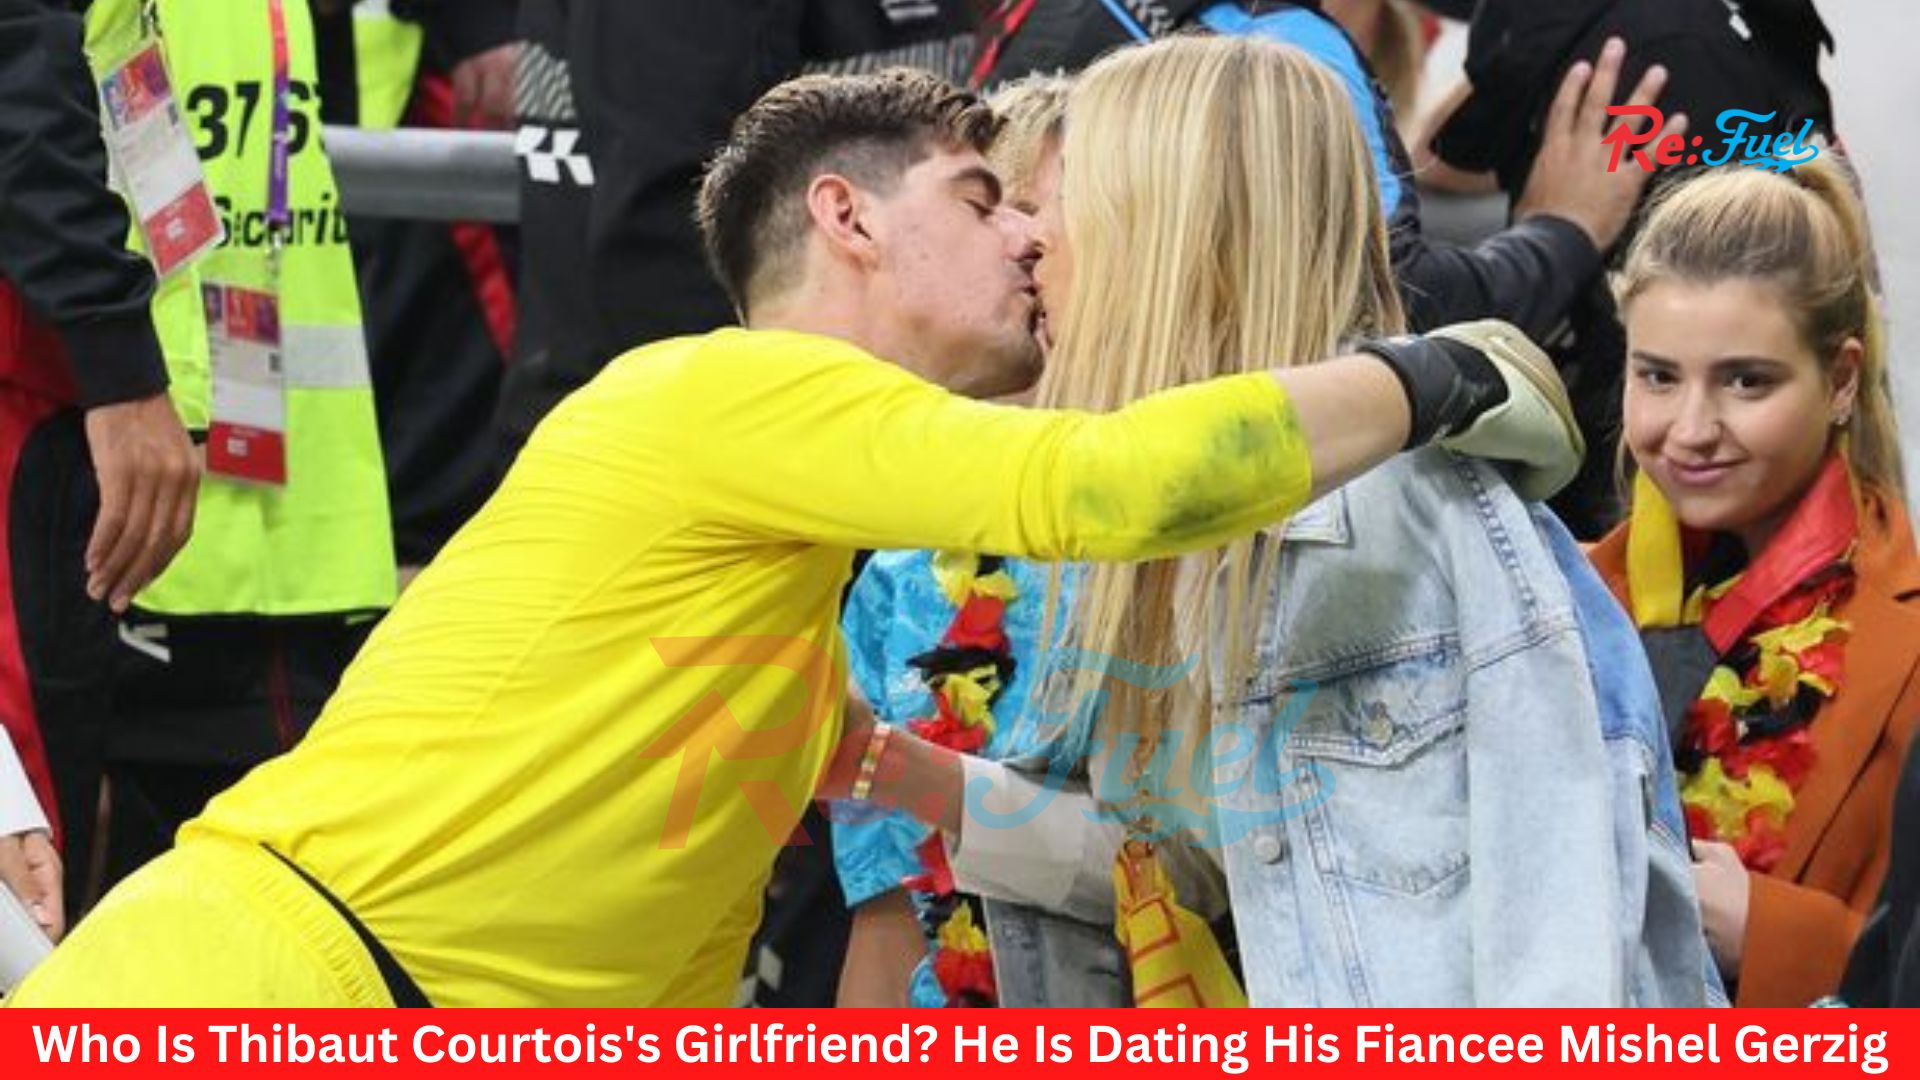 Who Is Thibaut Courtois's Girlfriend? He Is Dating His Fiancee Mishel Gerzig